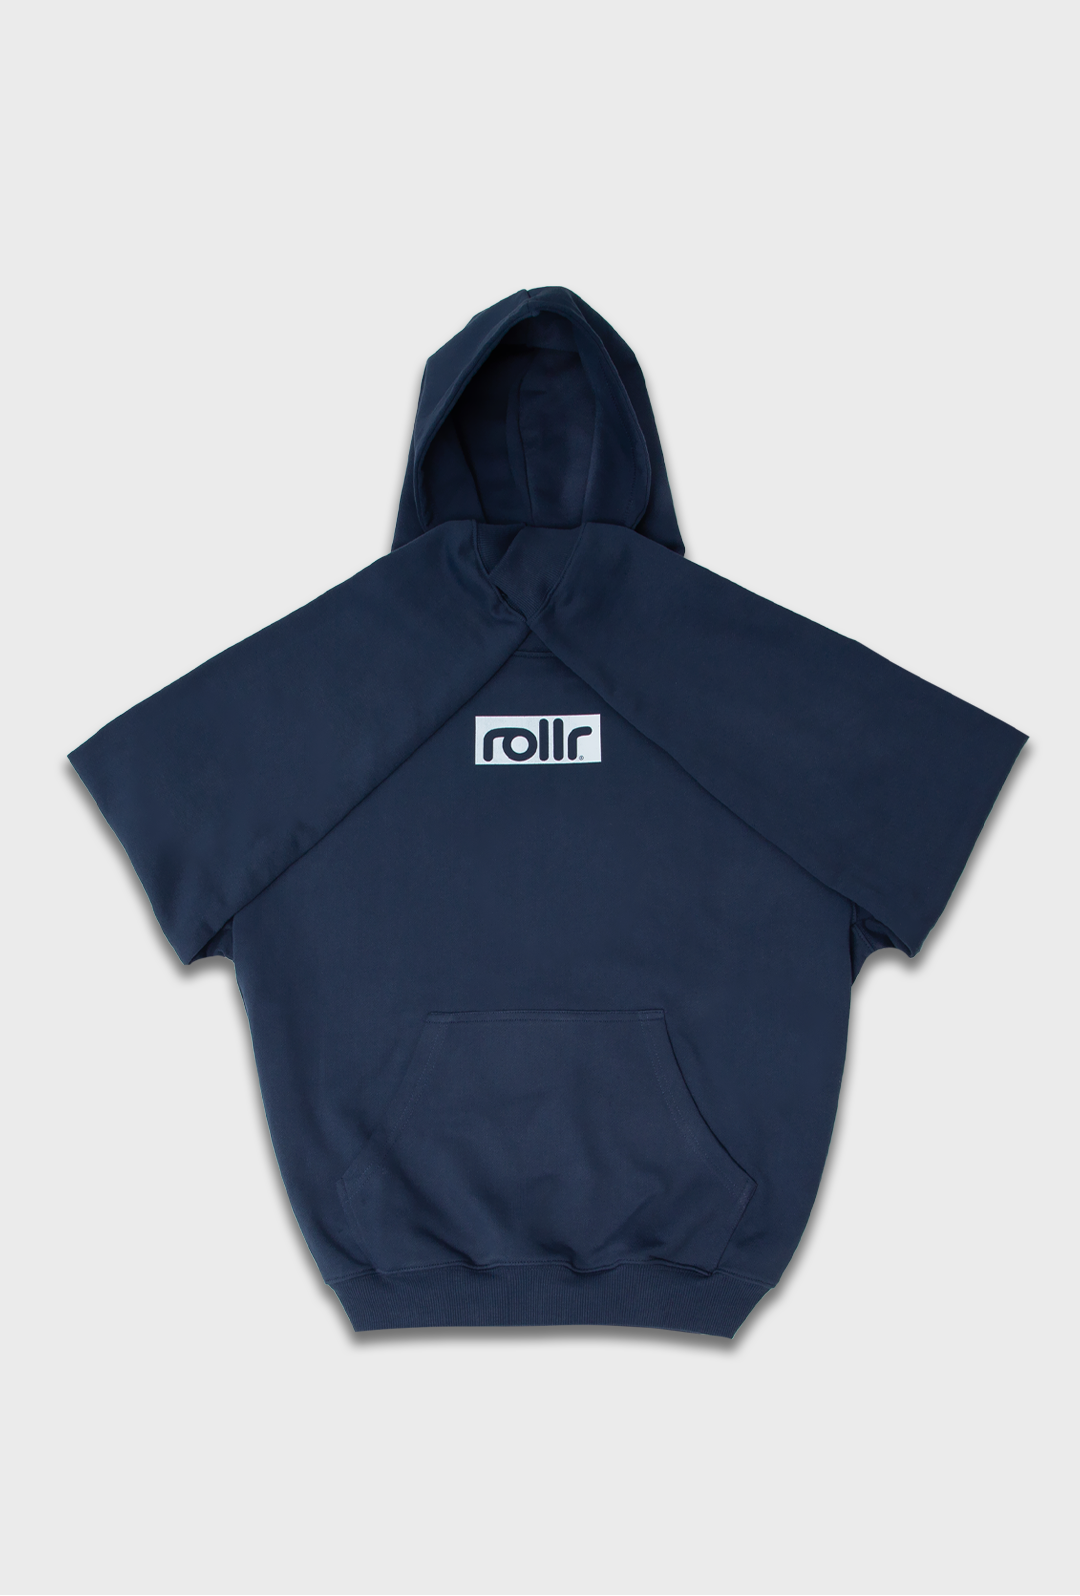 roller clothing oversized dusk blue mens hoodie made from organic French teary cotton 